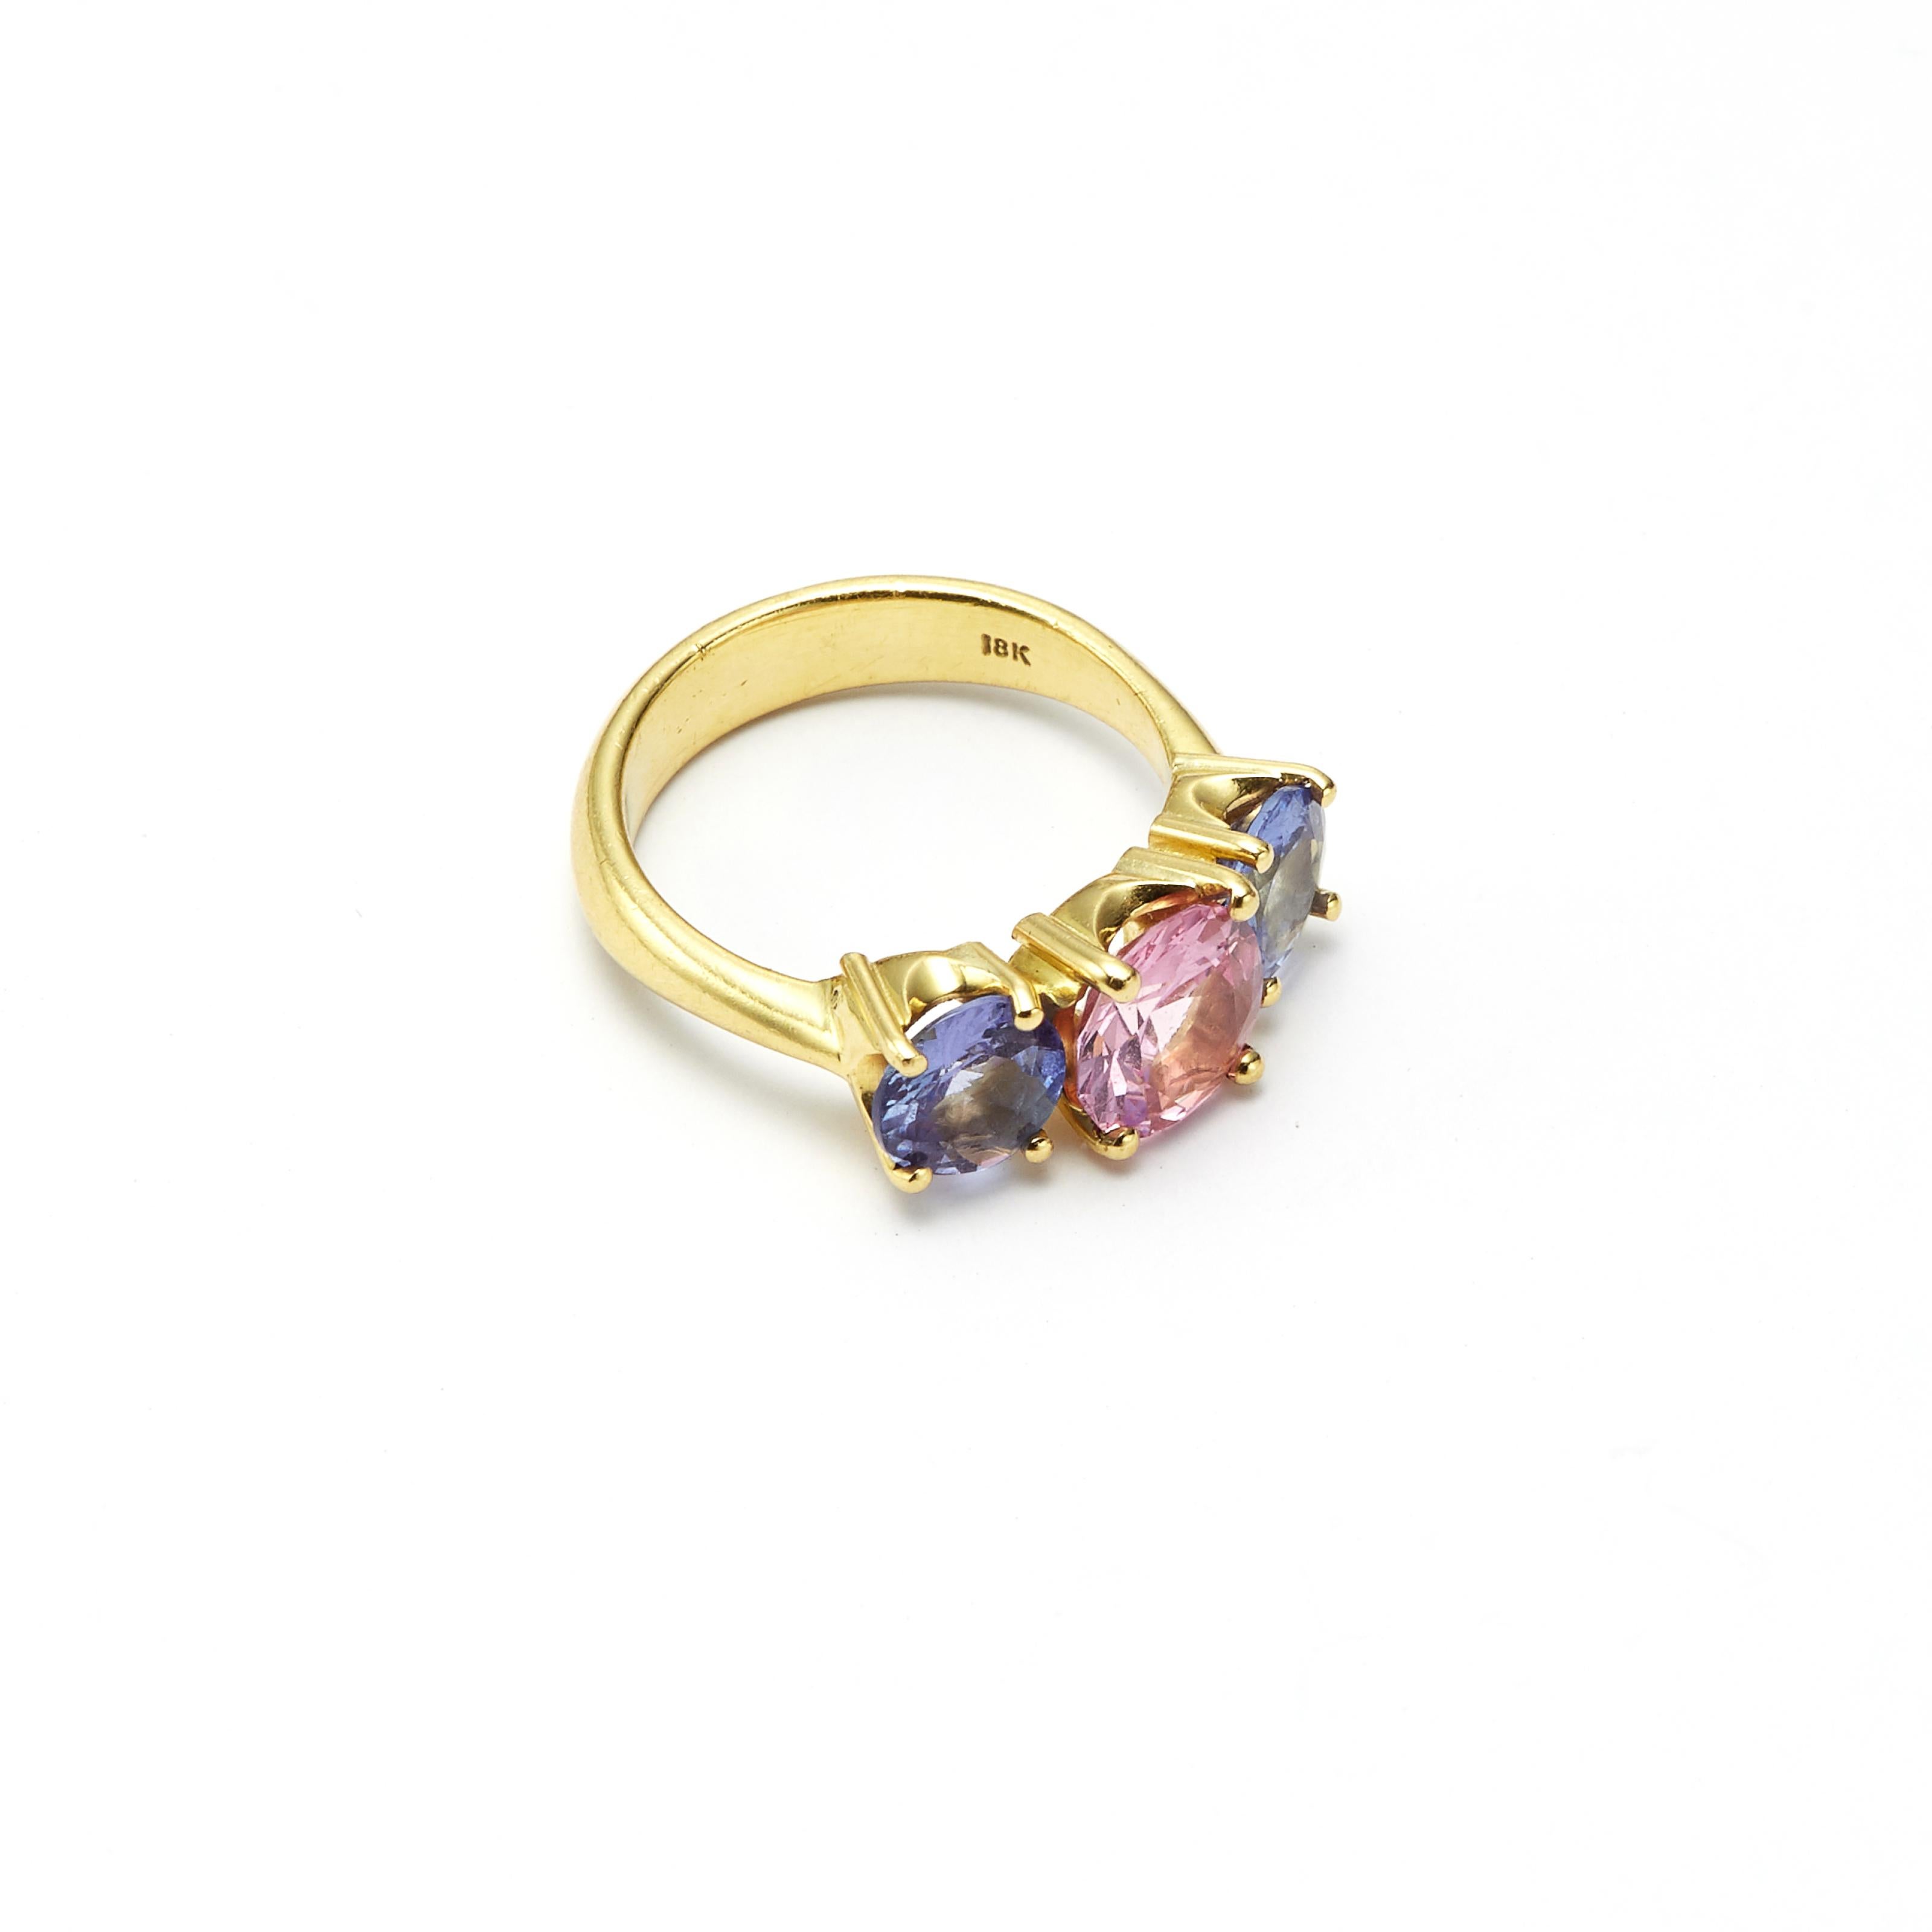 Pink and blue never looked so good. The radiance of the Pink Spinel and Tanzanites, set in 18 Karat Gold, provide a stunning display of color. 

Dimensions of Pink Spinel: 8.09mm x 8.84mm, 2.07 Carat 
Dimensions of Tanzanites: 6.67mm x 6.78mm, 2.17